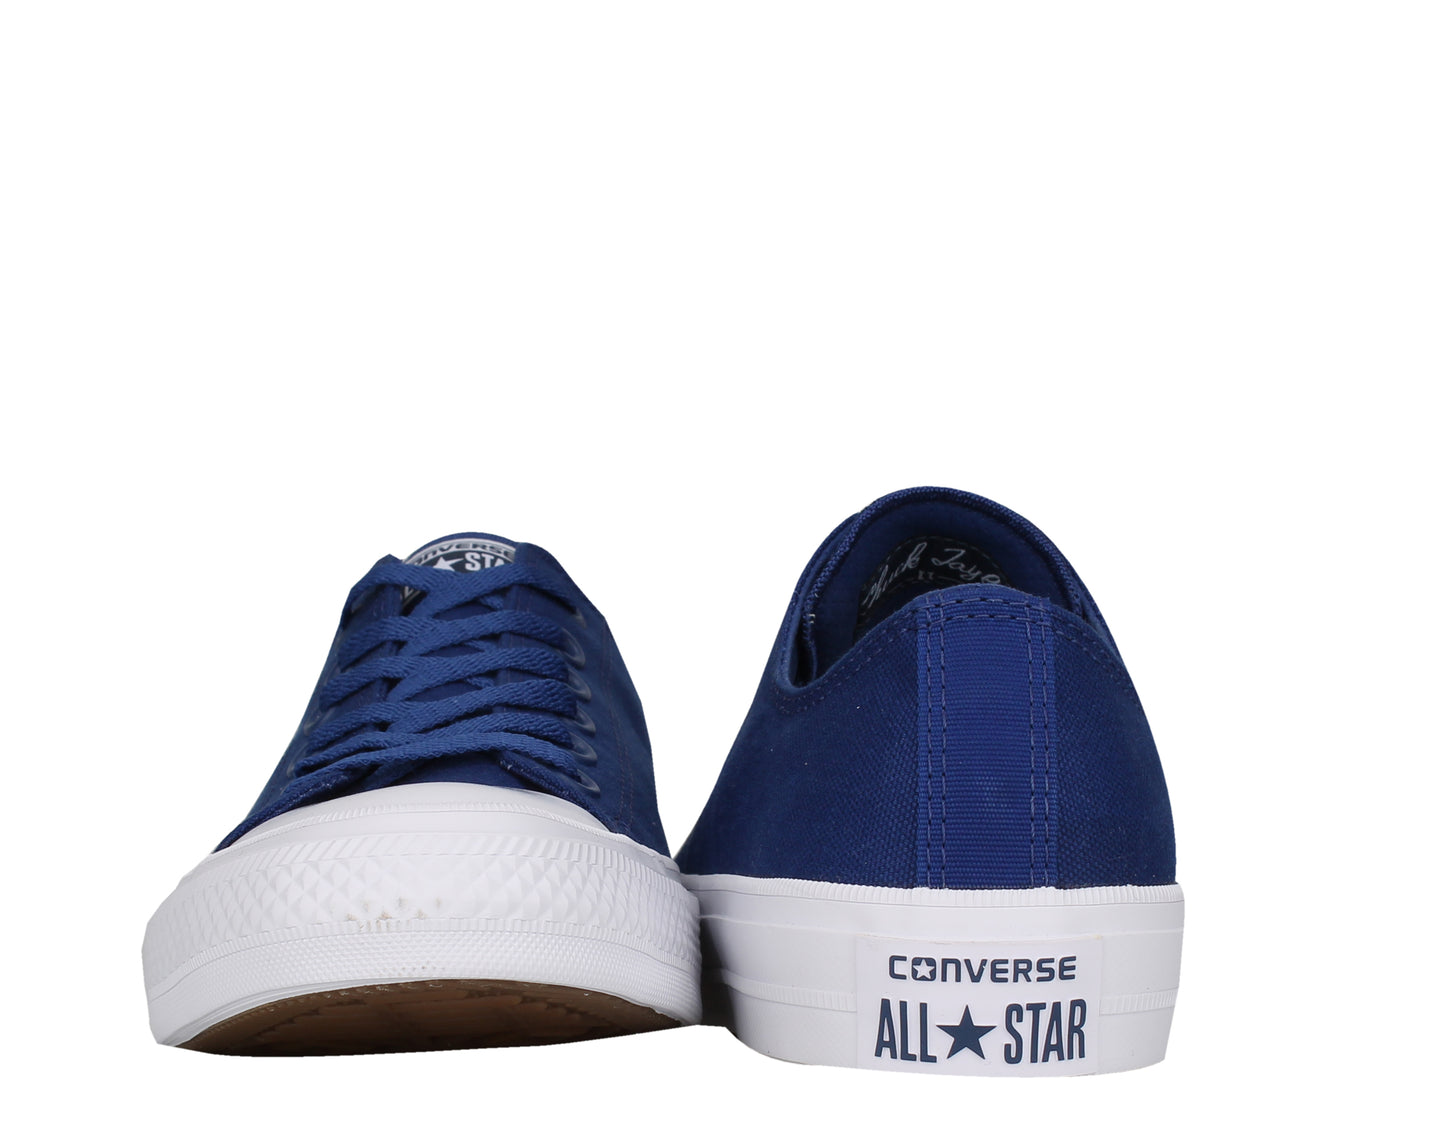 Converse Chuck Taylor All Star II Low Top